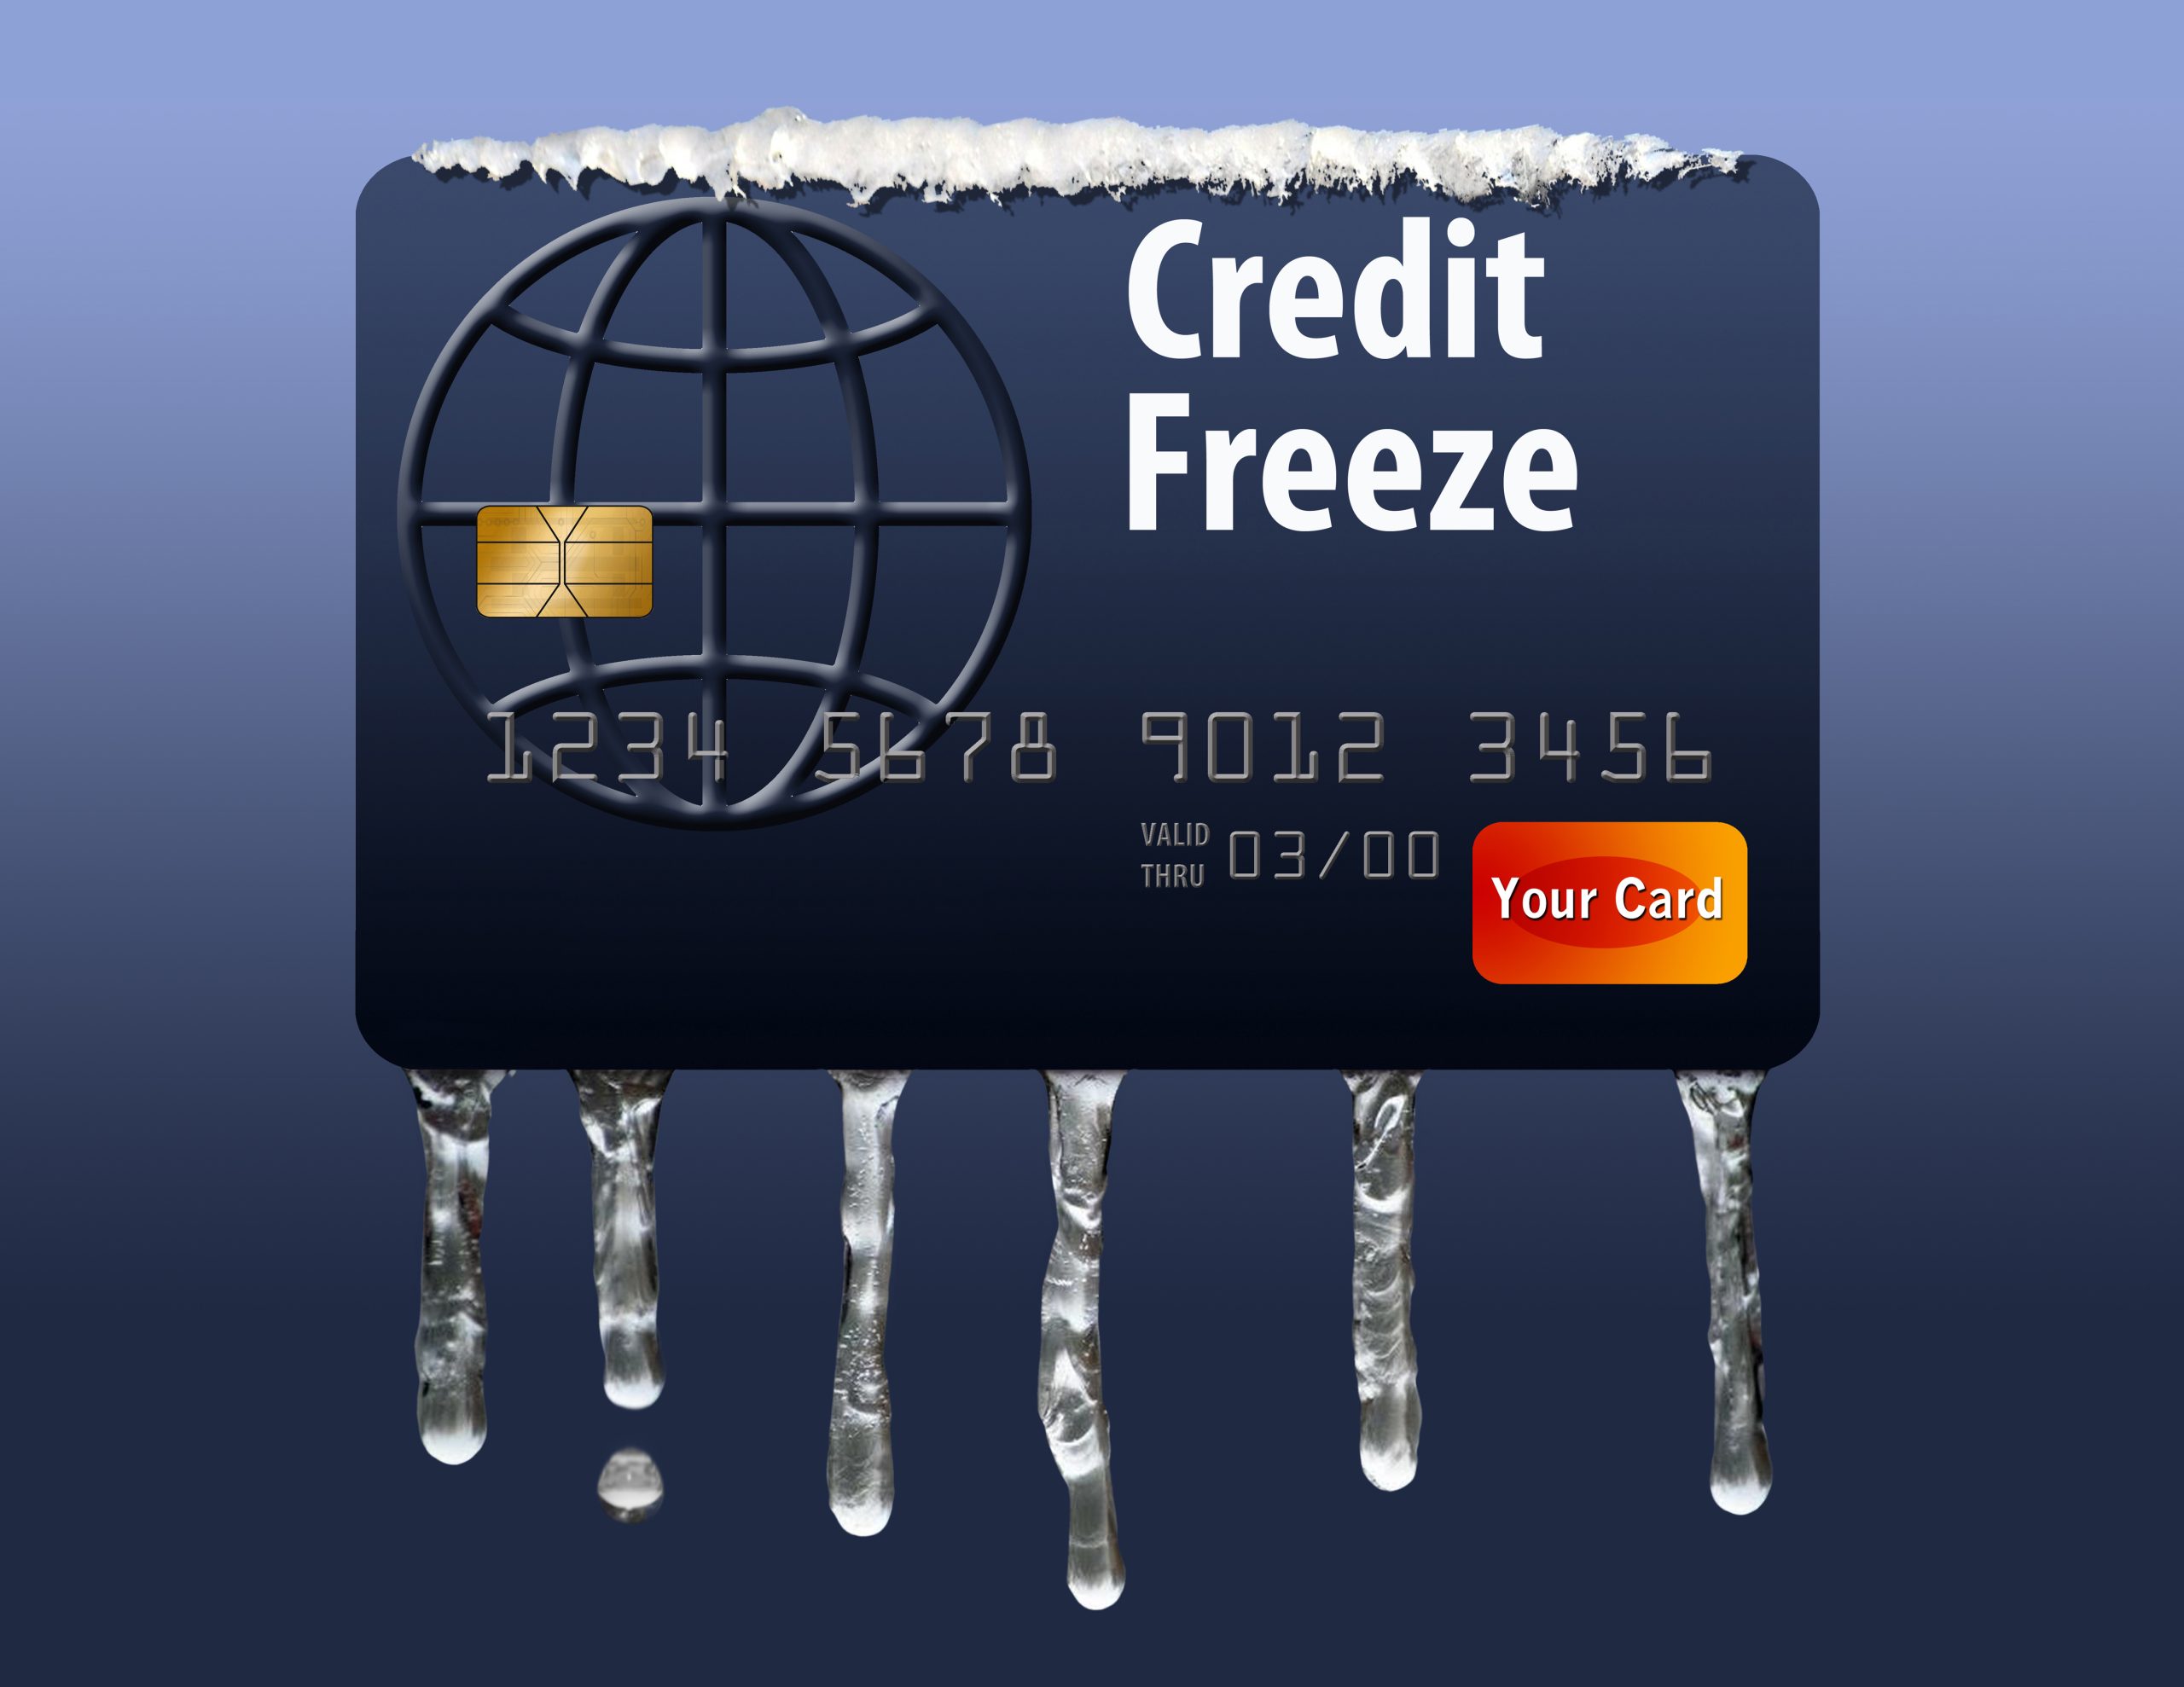 Credit freeze on your credit reports is represented by this illustration of a snow capped credit card with icicles